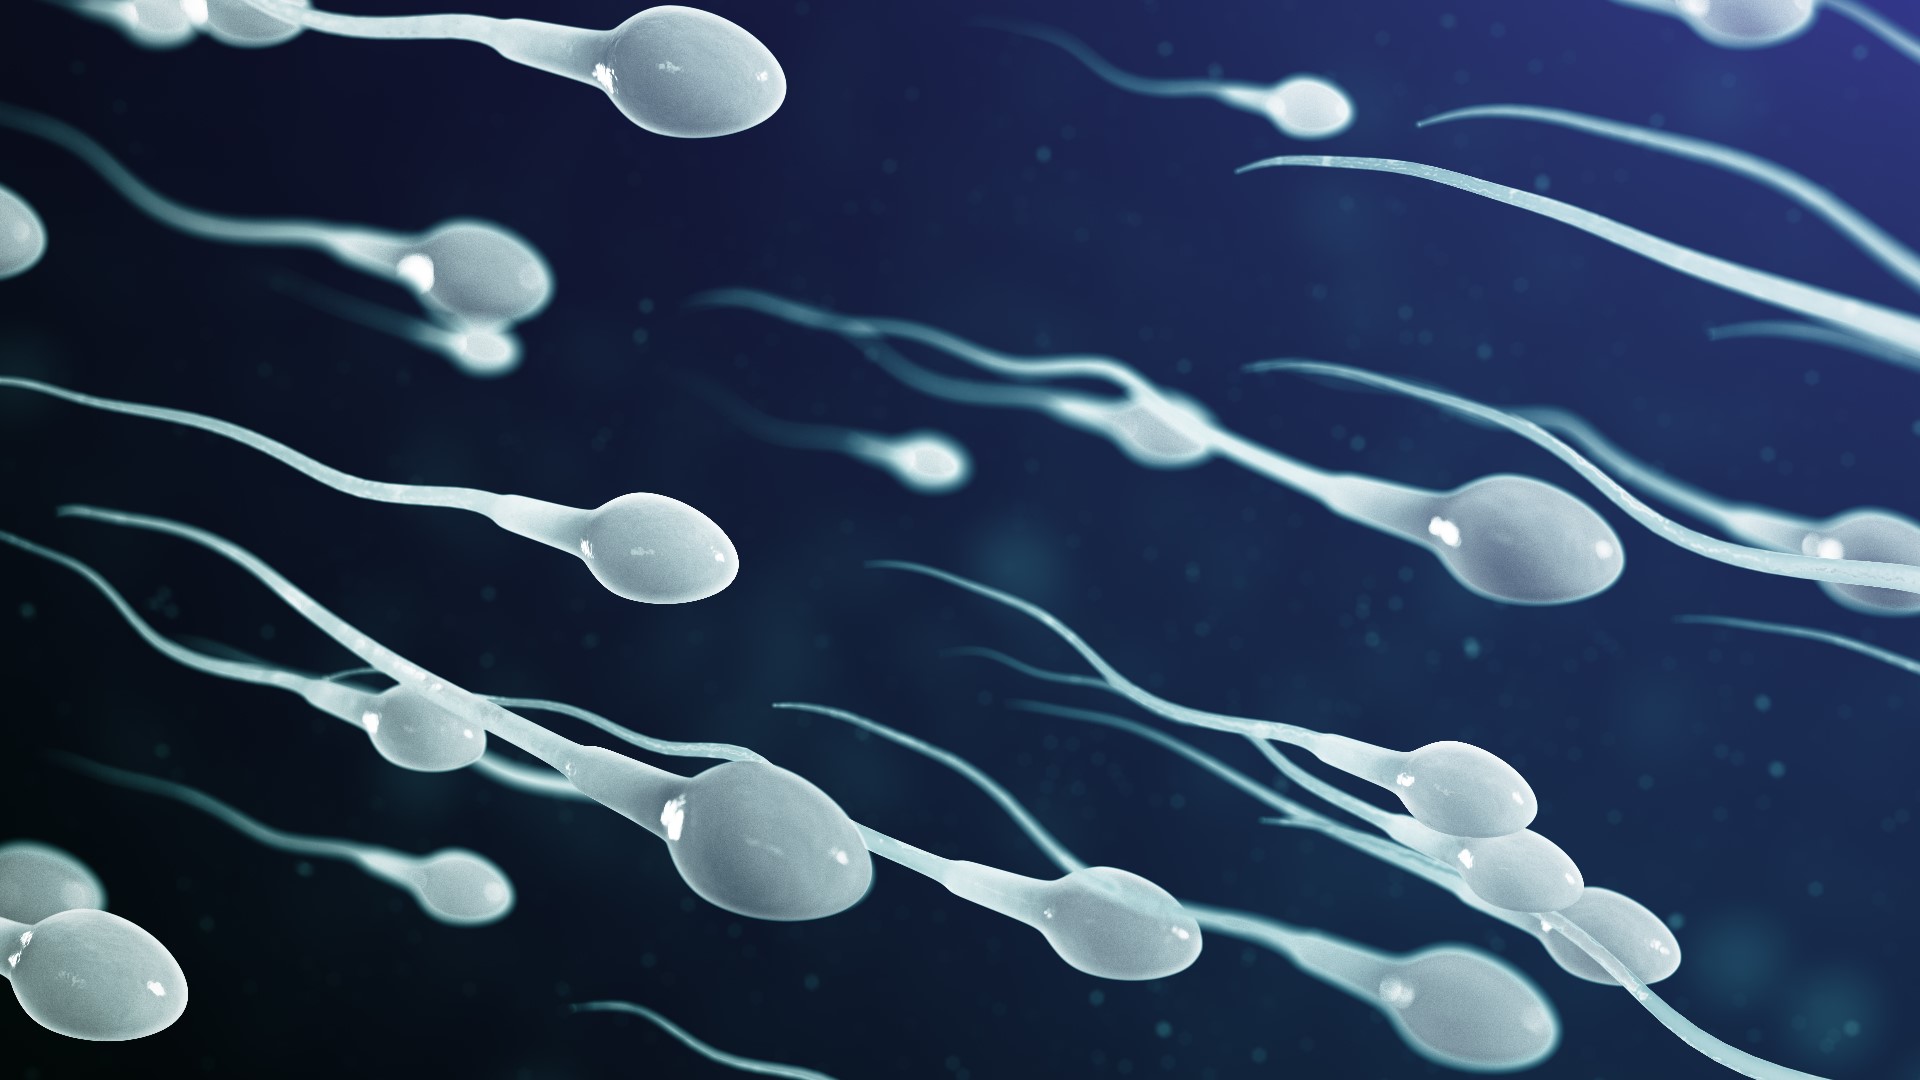 A 40-year-long study showed sperm counts have dropped by nearly half. Dr. Shanna Swan hypothesizes men will no longer produce sperm by 2045.